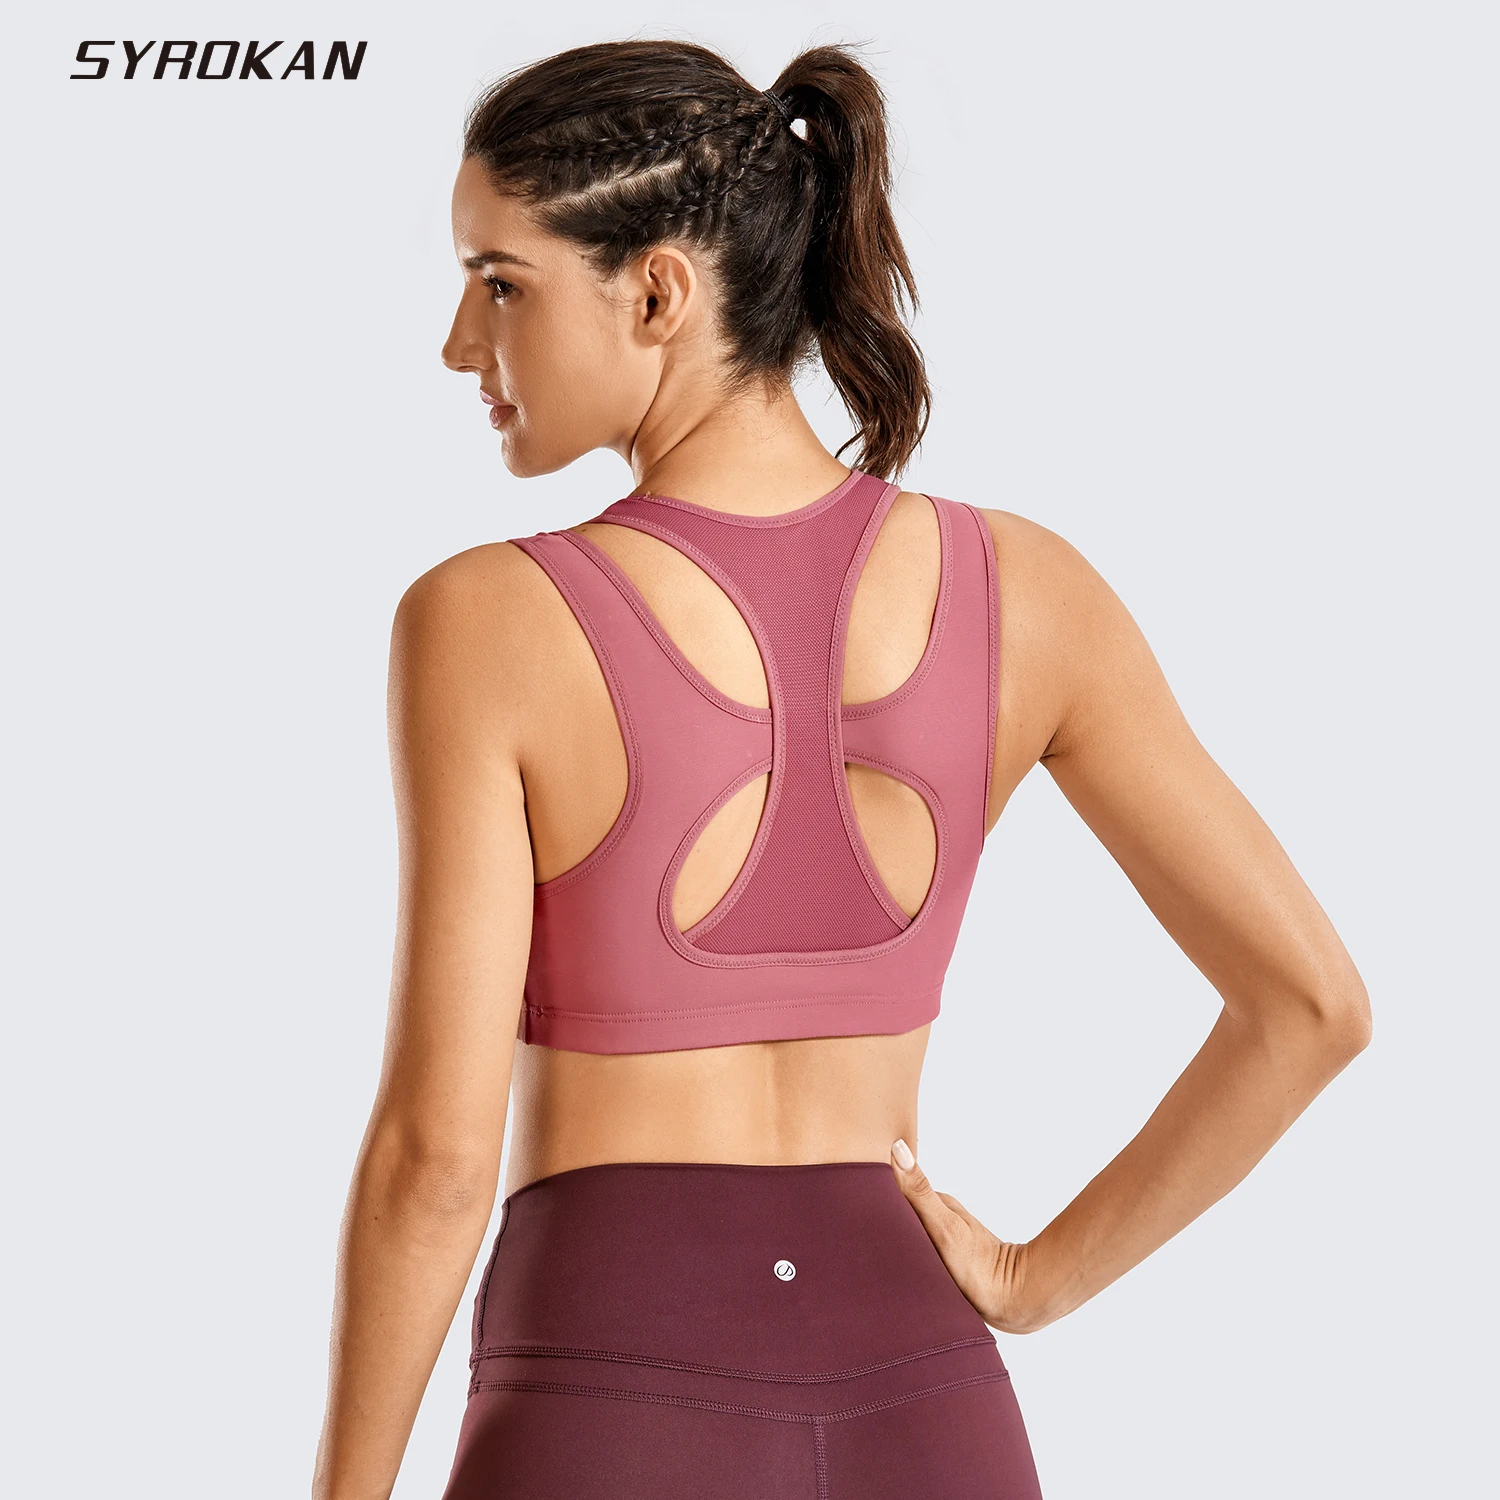 

SYROKAN Women Workout Sports Bra High Impact Support Bounce Control Wirefree Mesh Racerback Top Fitness Running Athletic Appare